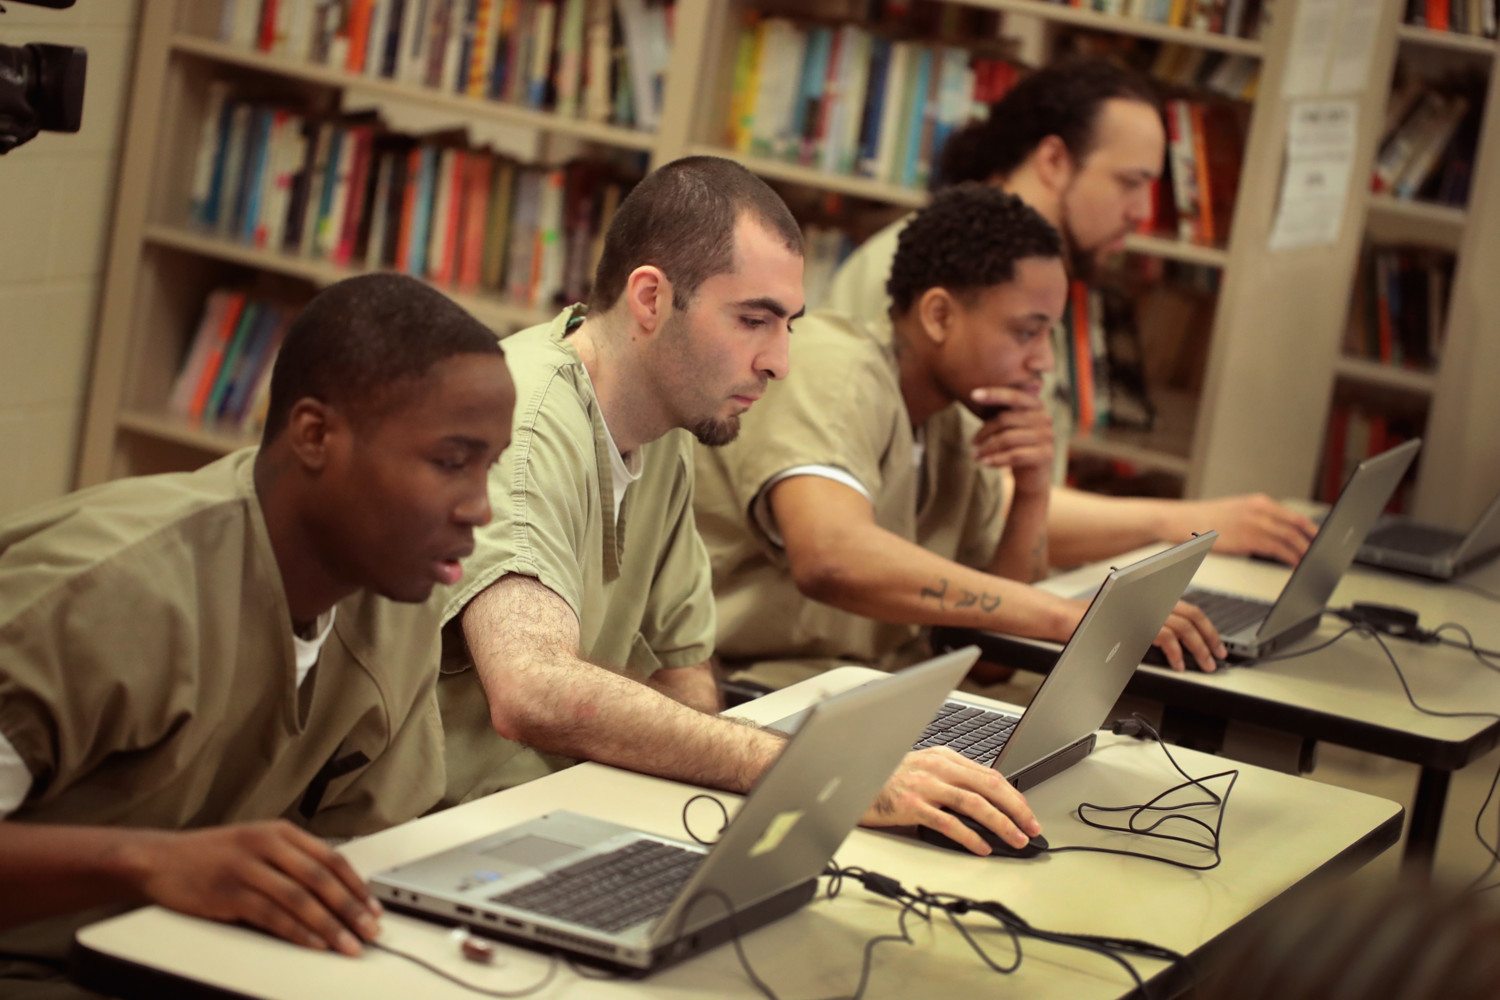 Cook County Inmates Take Part In Online Chess Tournament With Brazilian Inmates